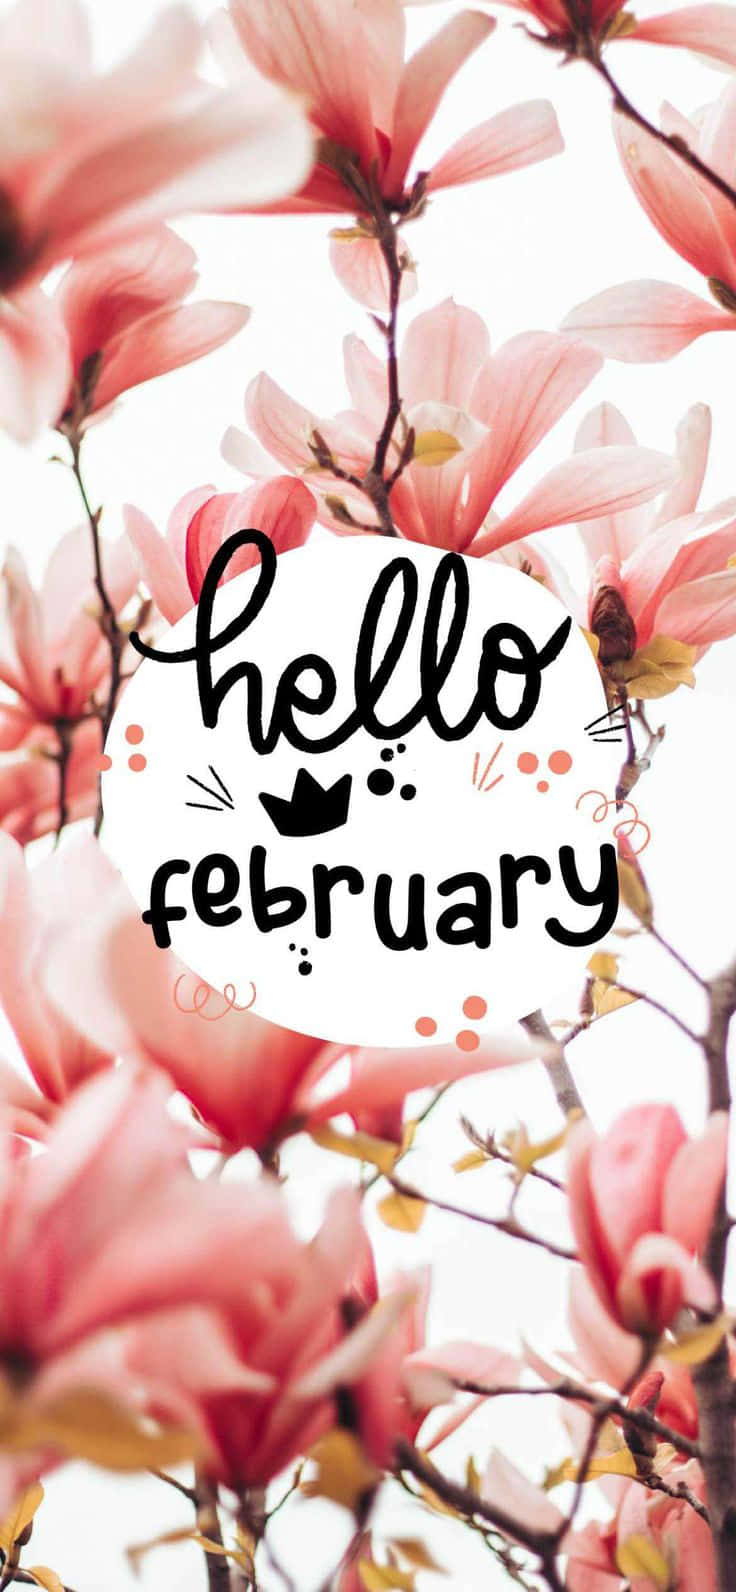 Welcome February - Time For Fun and Renewal Wallpaper